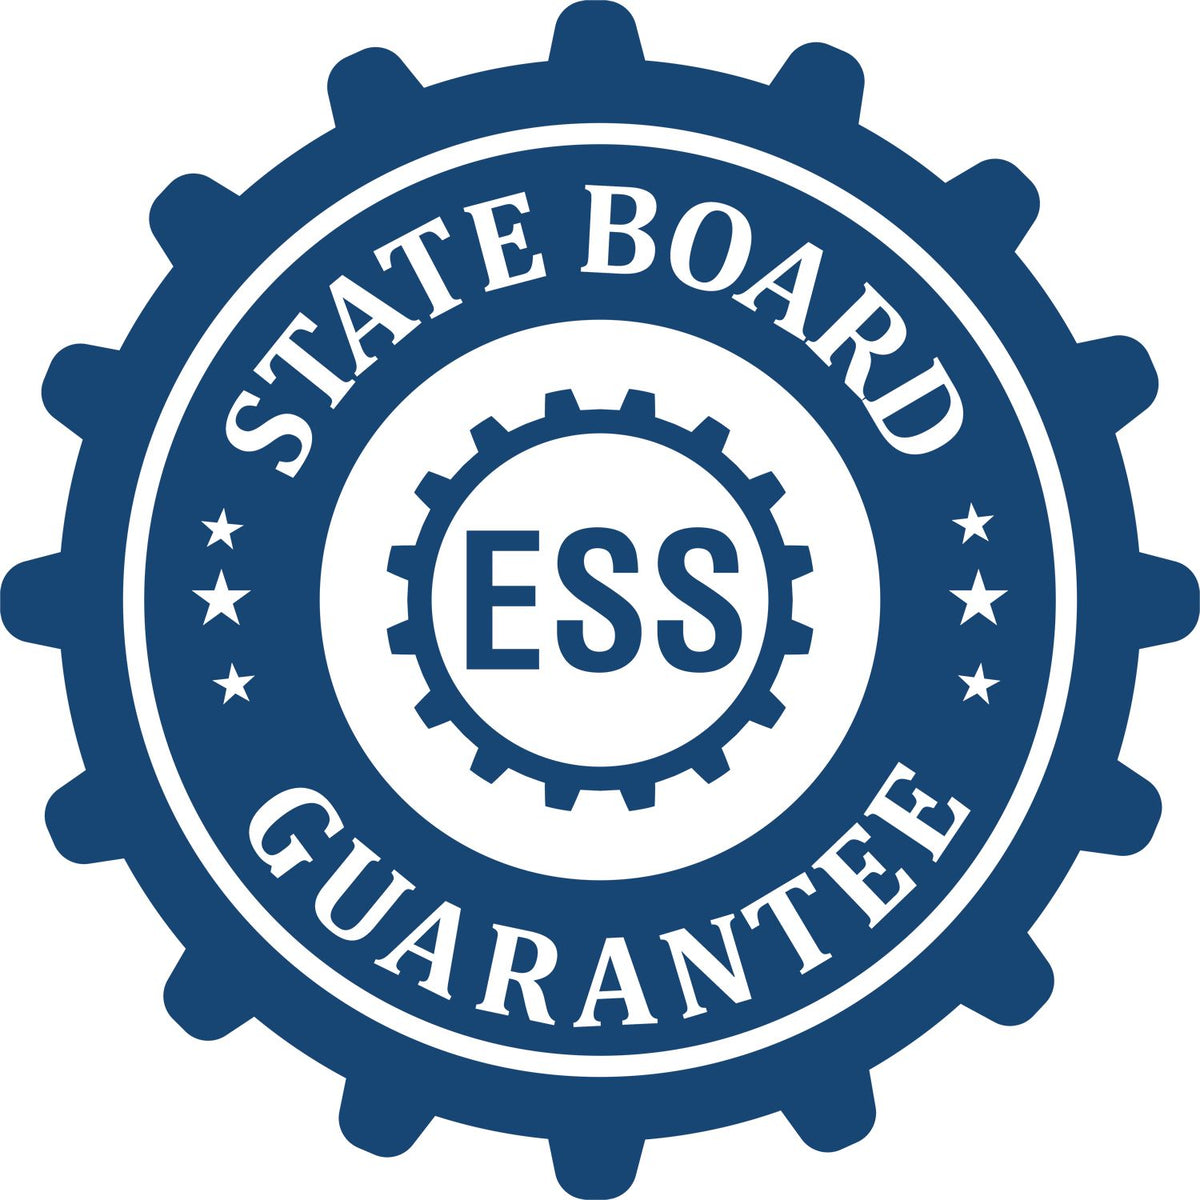 An emblem in a gear shape illustrating a state board guarantee for the Handheld Arkansas Professional Geologist Embosser